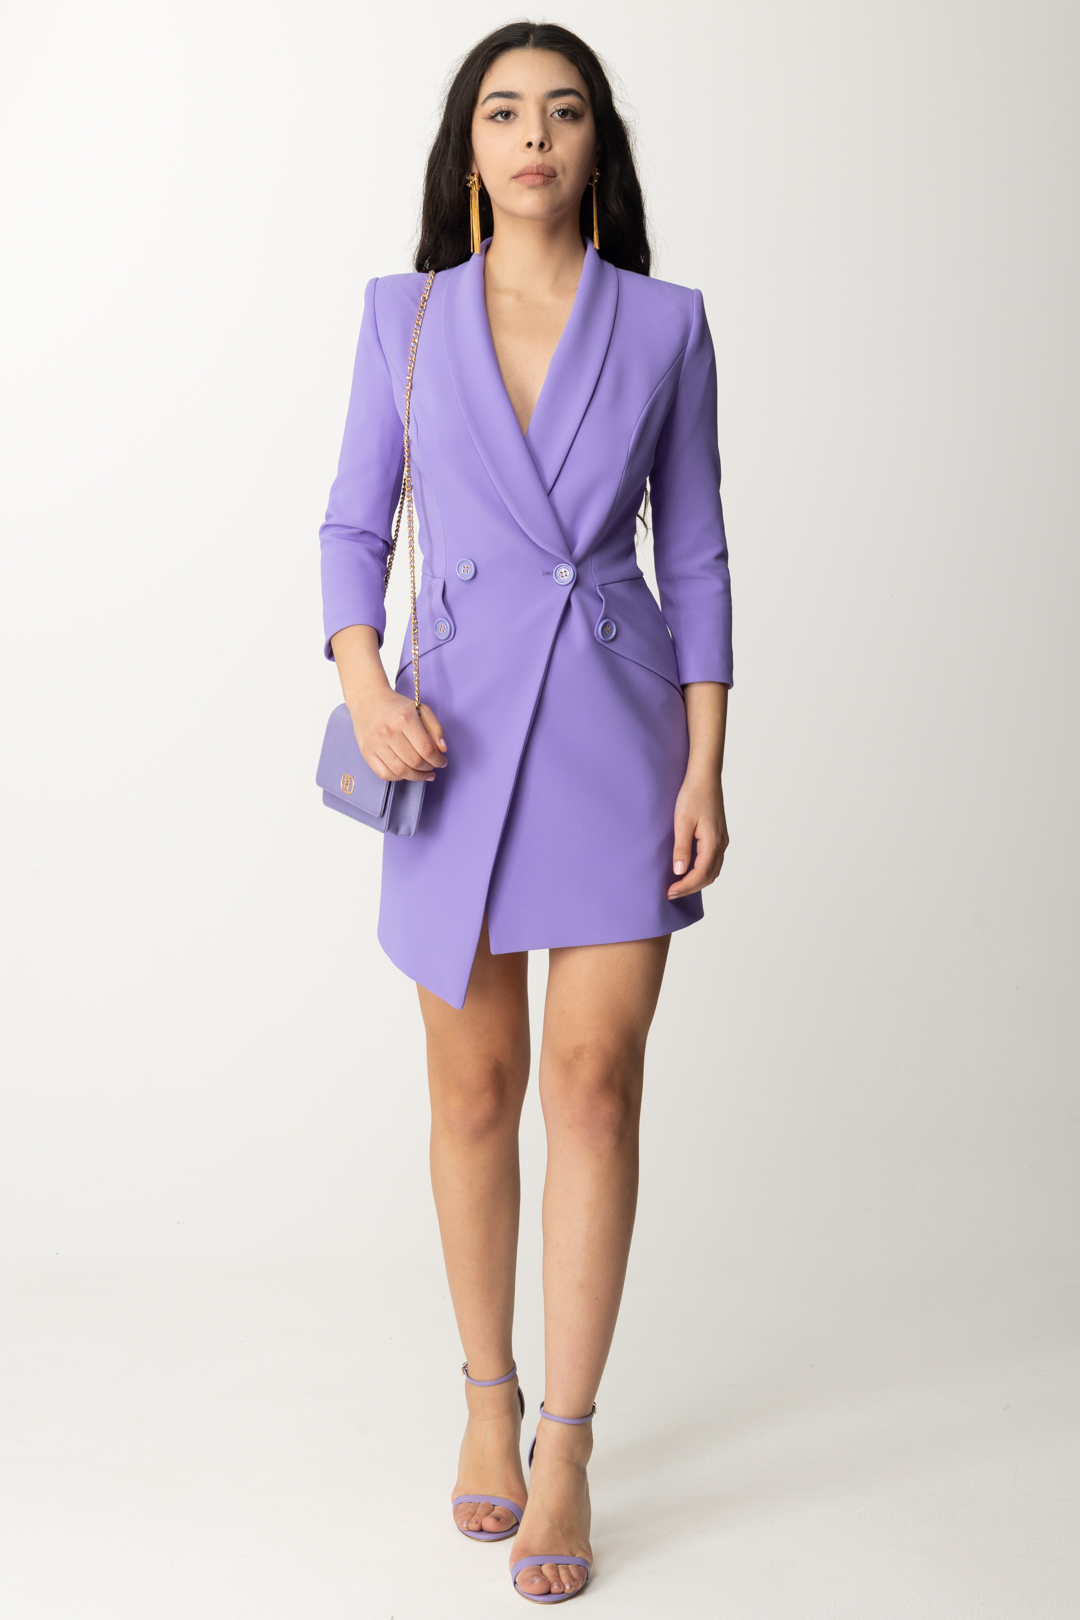 Preview: Elisabetta Franchi Asymmetric Double-Breasted Dress in Stretch Crepe IRIS